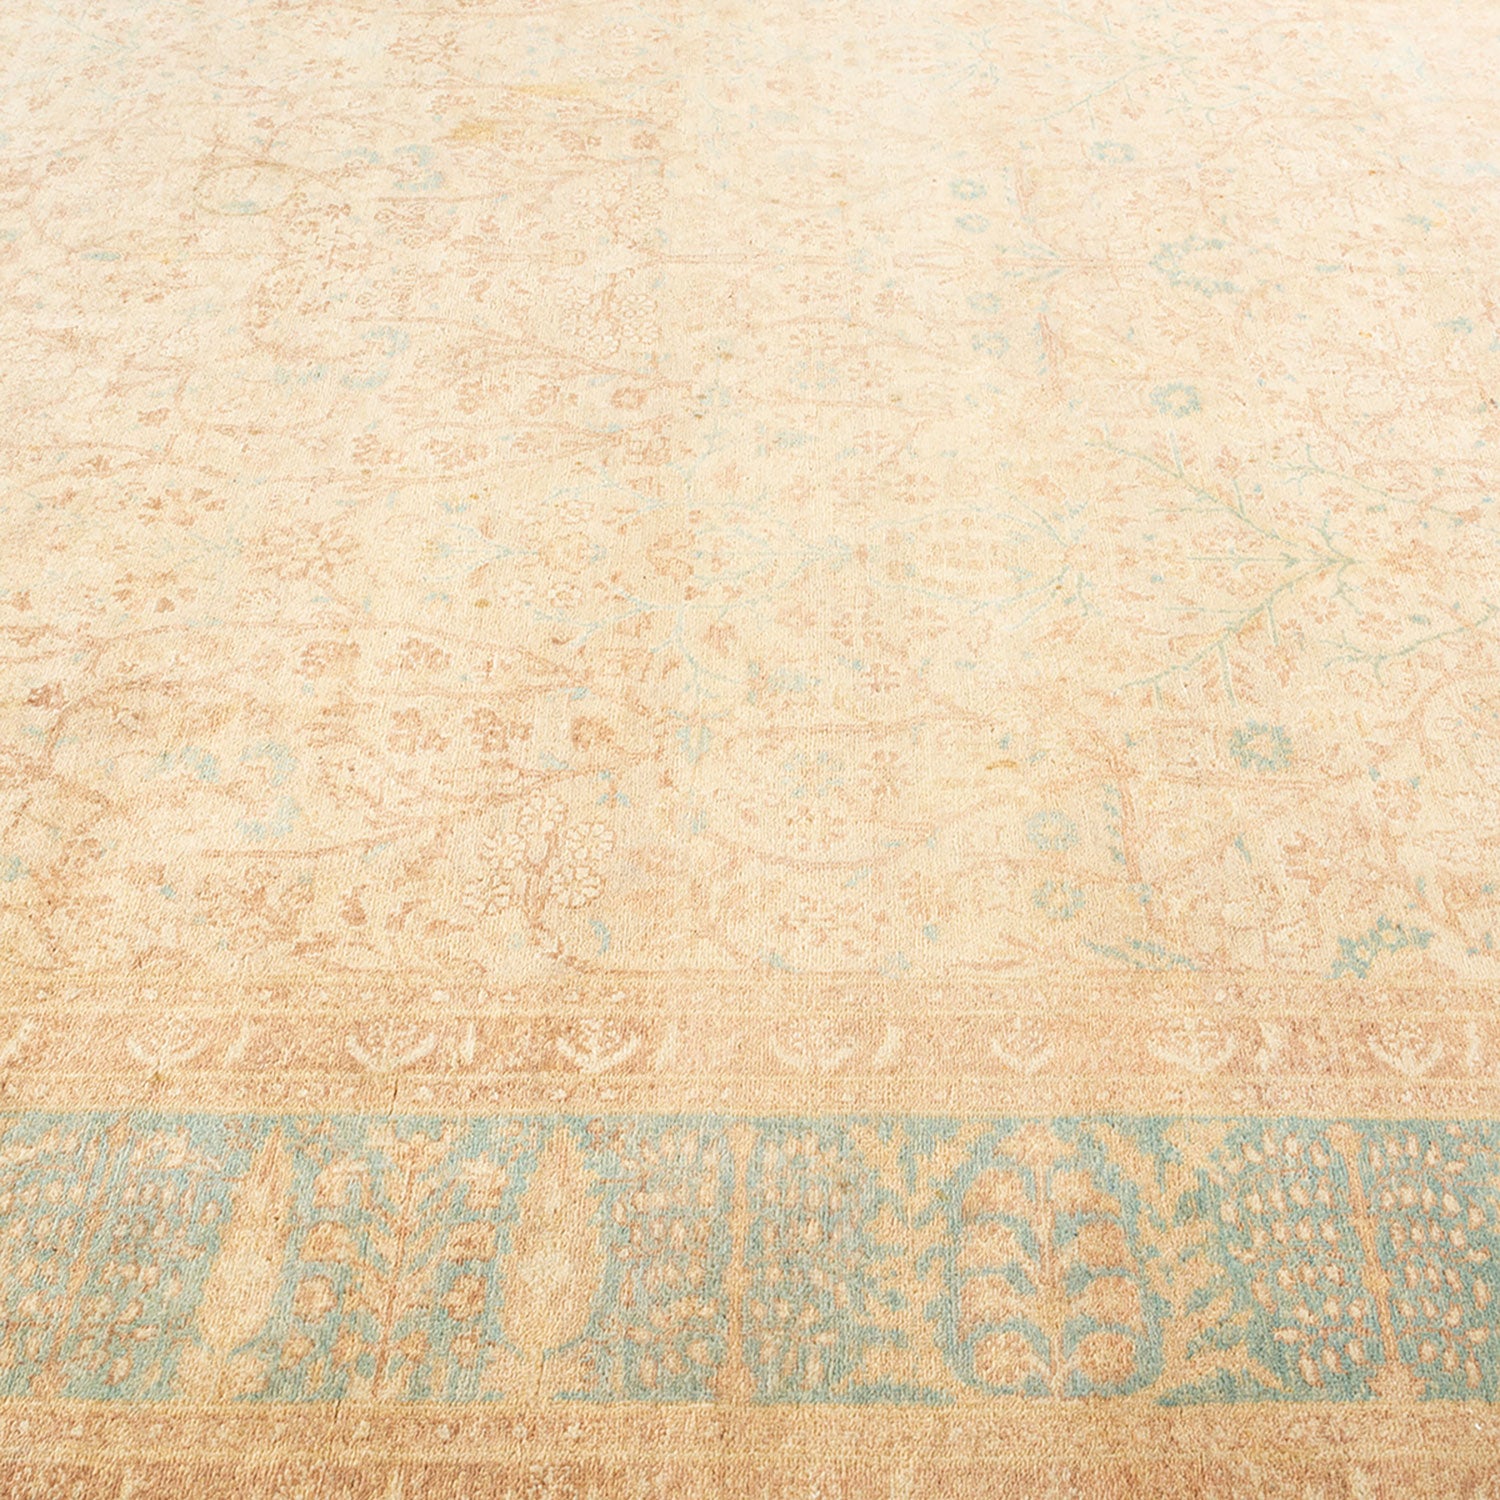 Large weathered vintage rug with faded turquoise and tan designs.